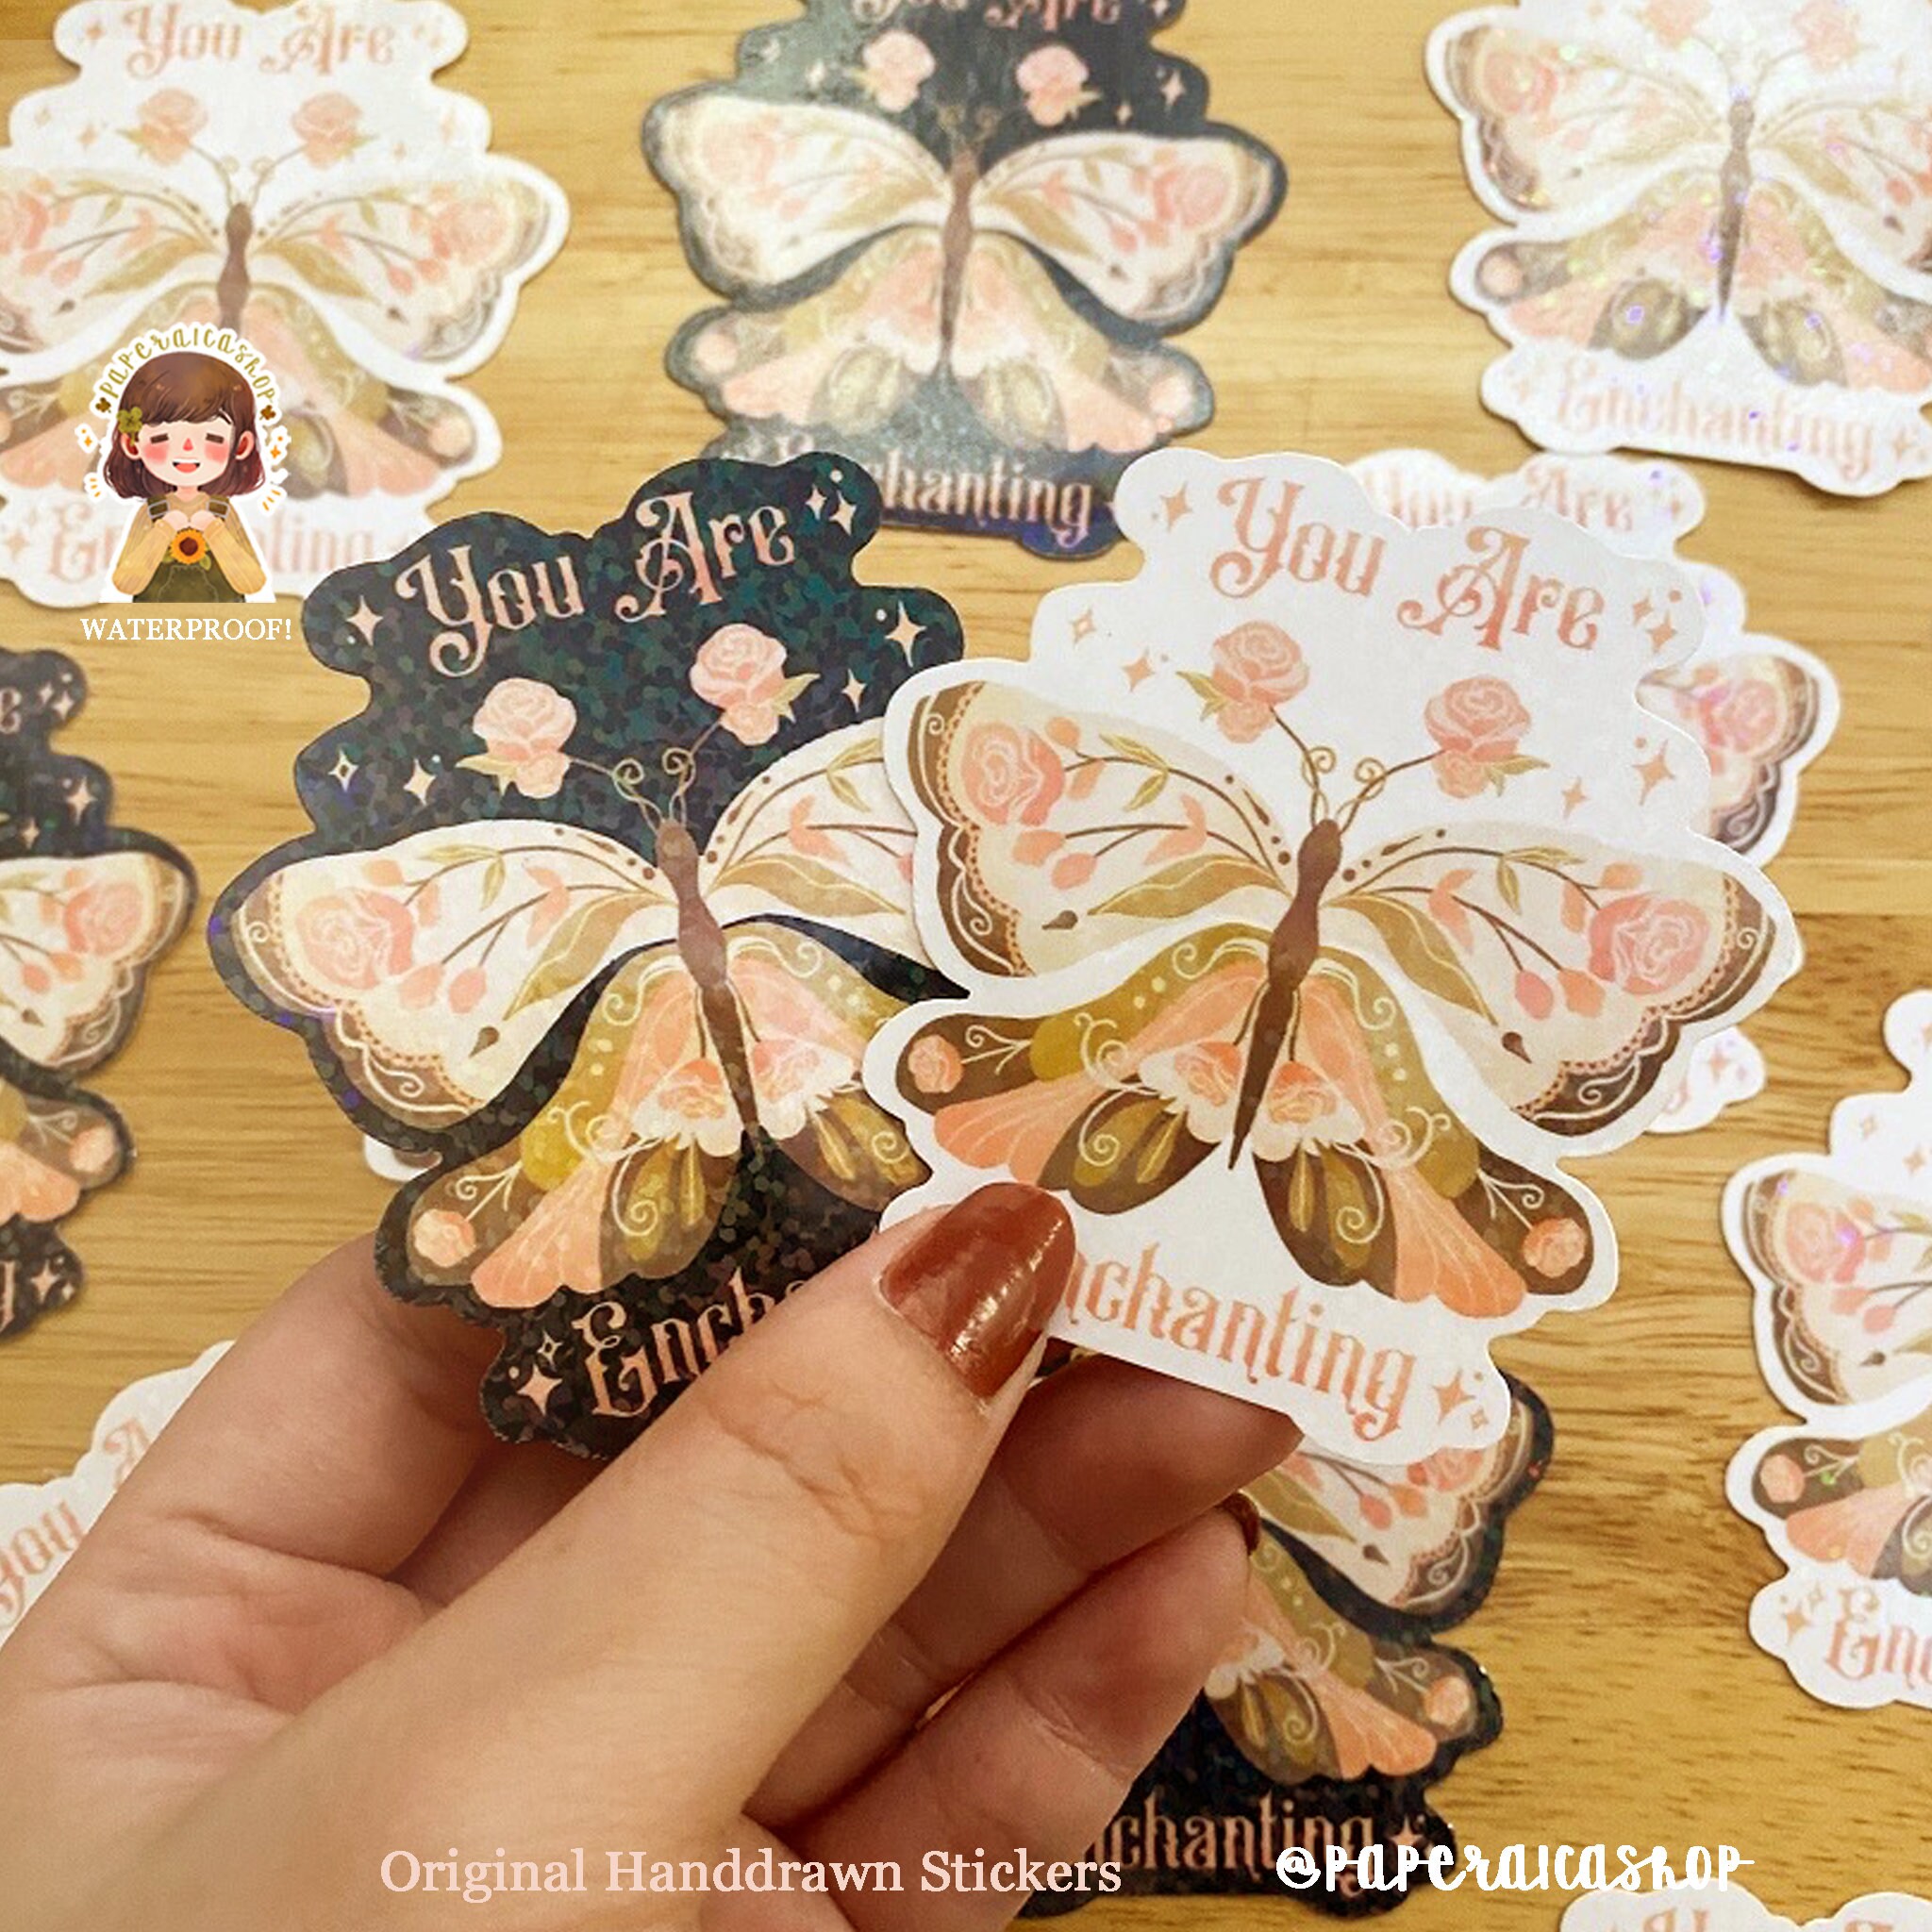 TULX aesthetic stickers stickers stationery custom stickers